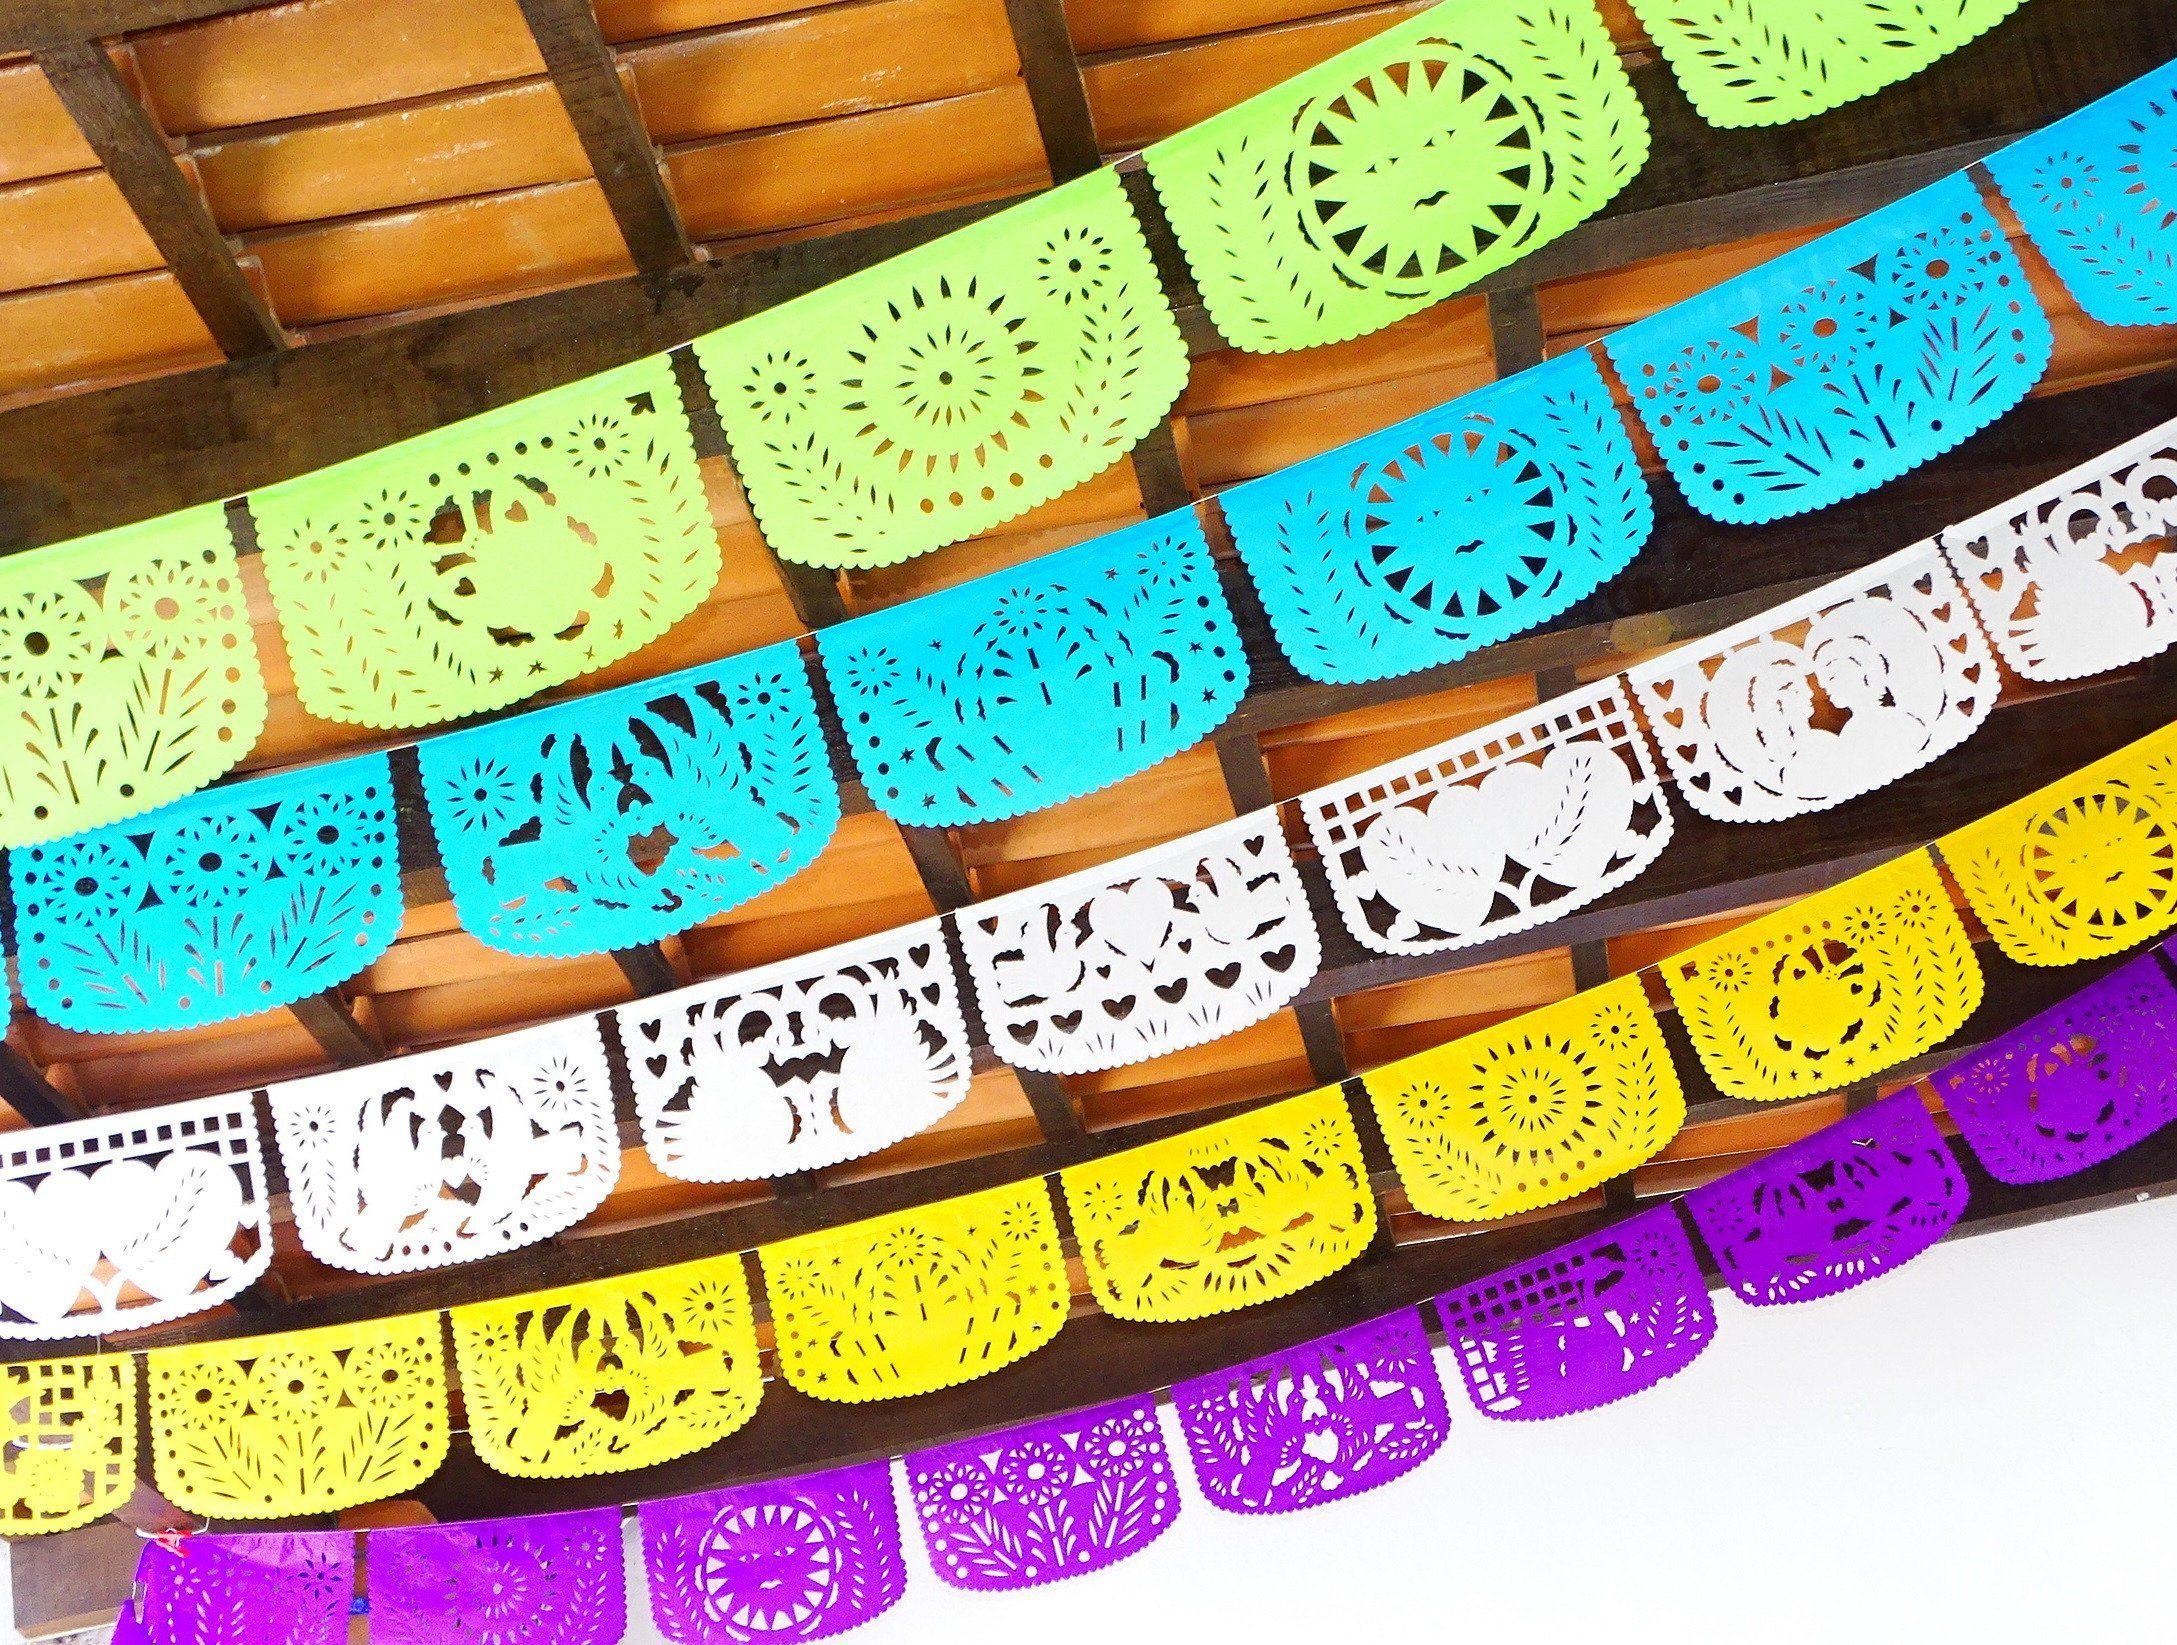 Mexican Papel Picado Banner in Multi-Color (5 Pack)